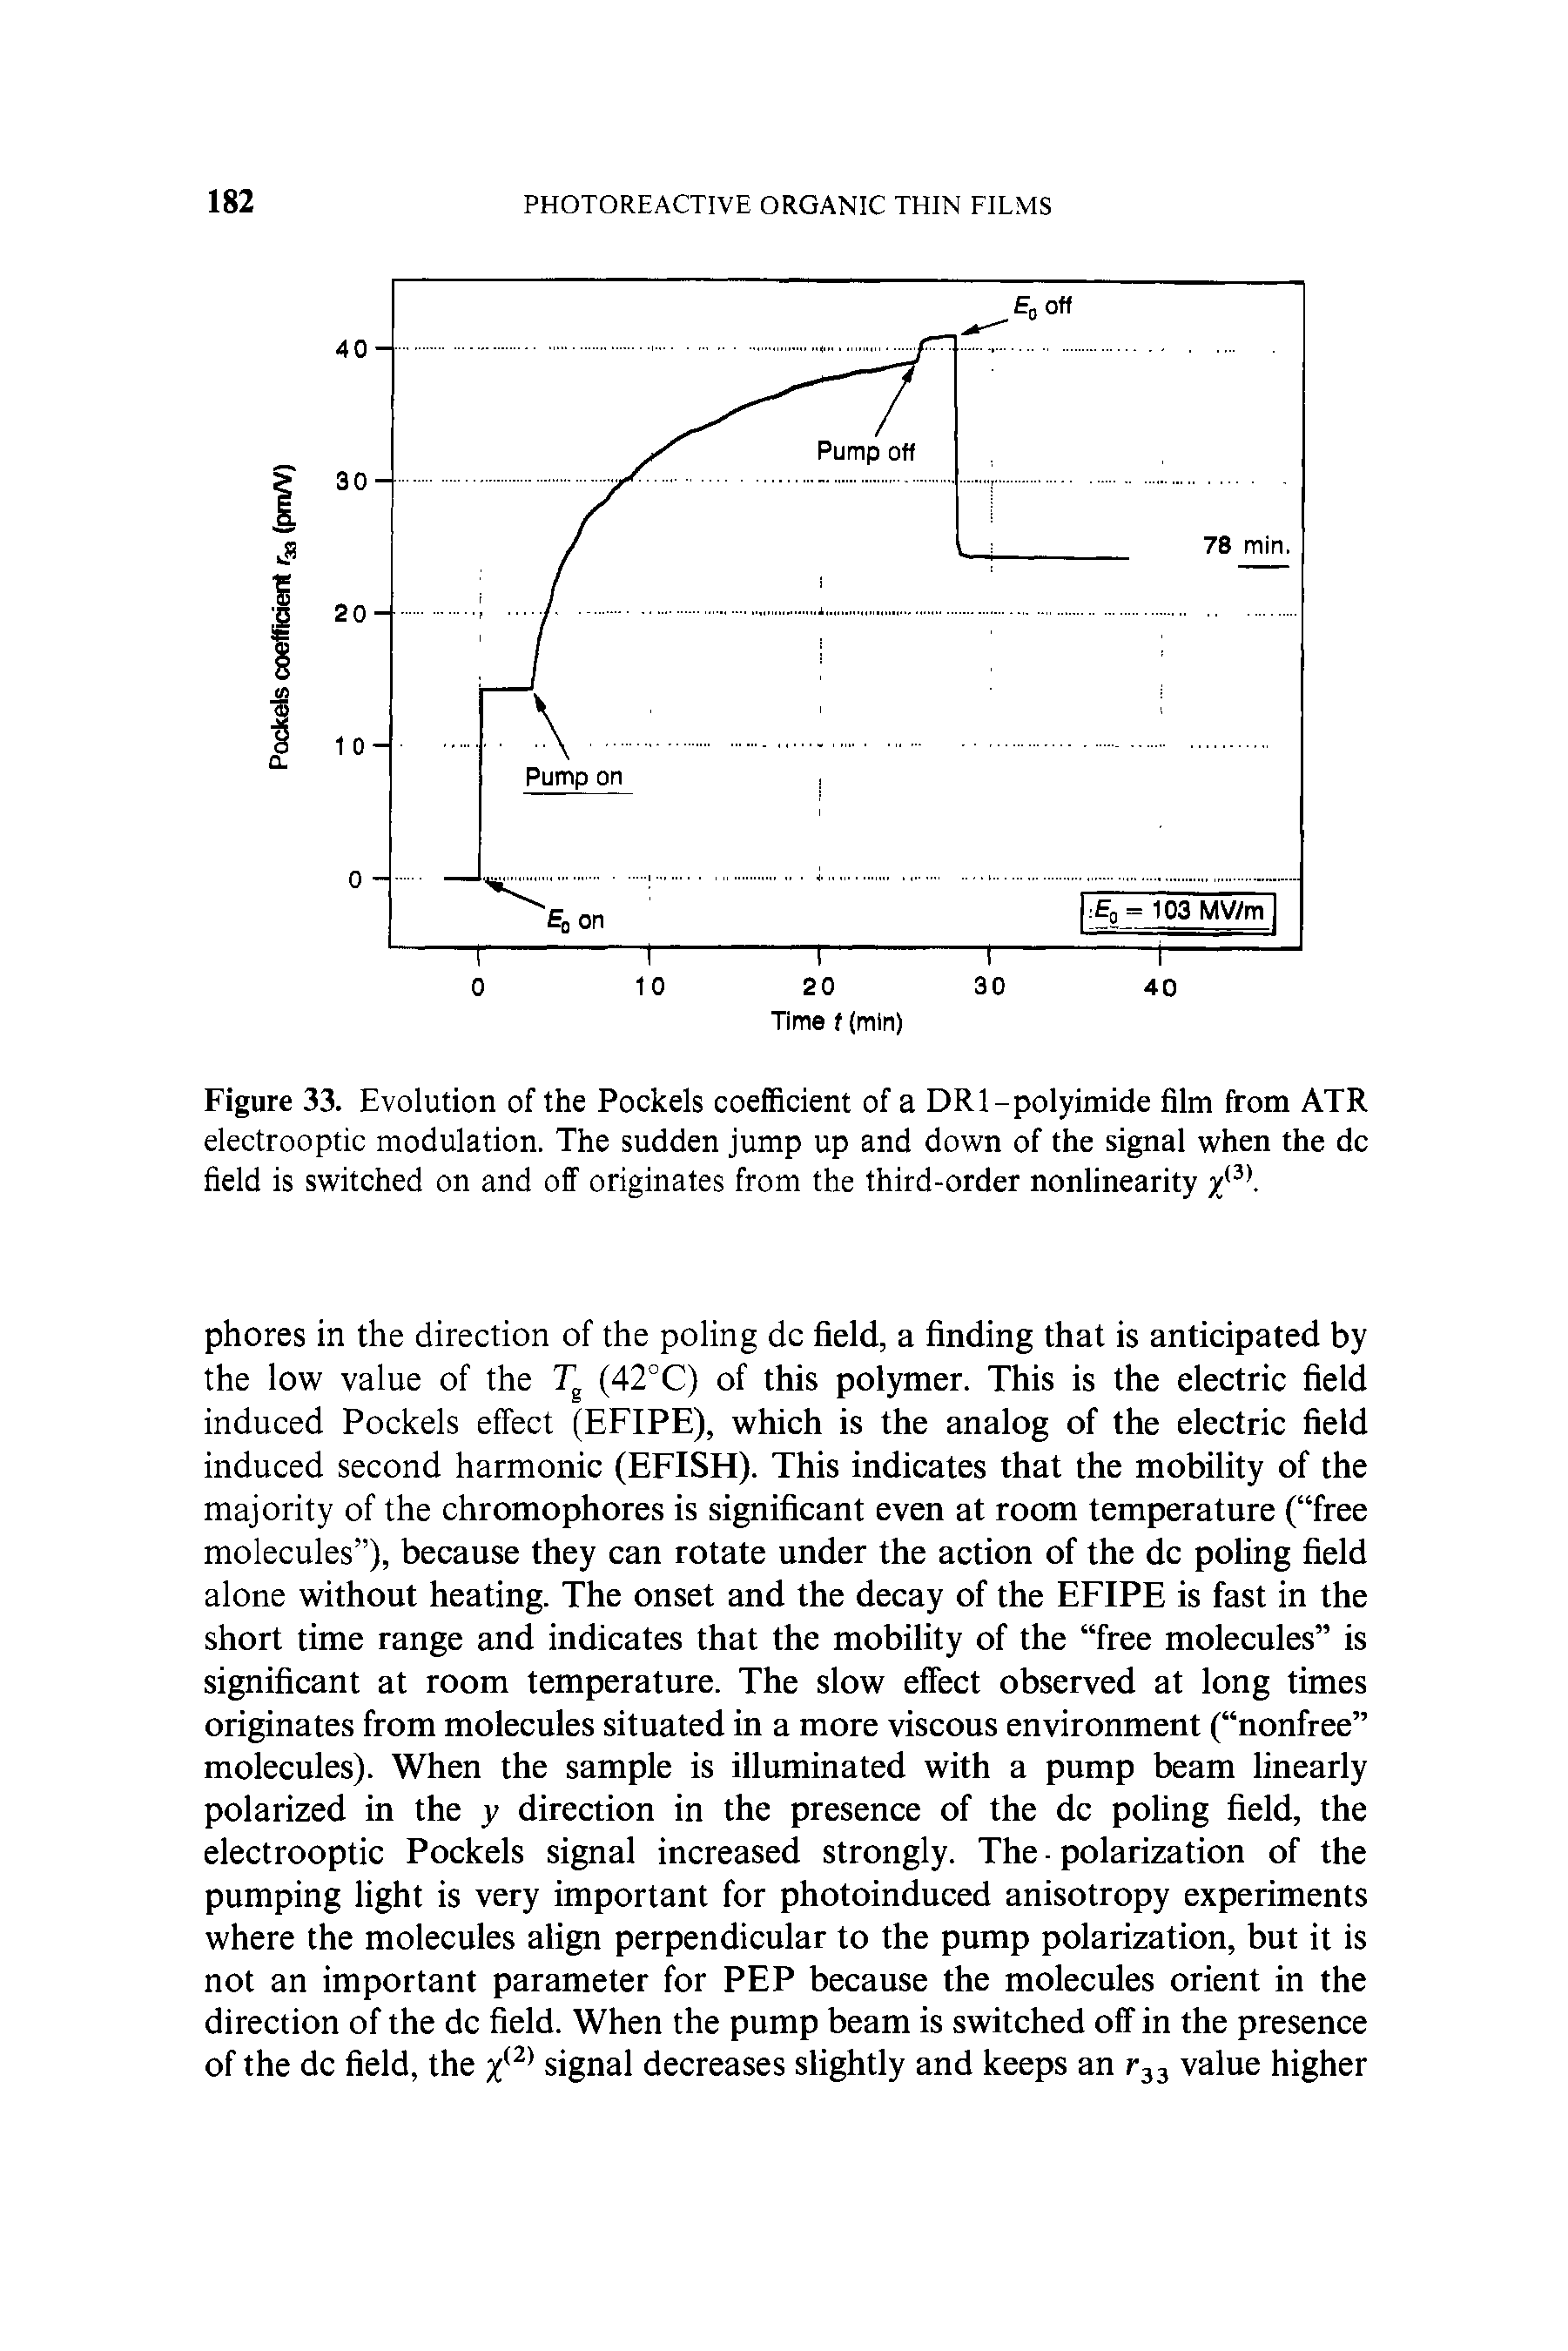 Figure 33. Evolution of the Pockels coefficient of a DRl-polyimide film from ATR electrooptic modulation. The sudden jump up and down of the signal when the dc field is switched on and off originates from the third-order nonlinearity...